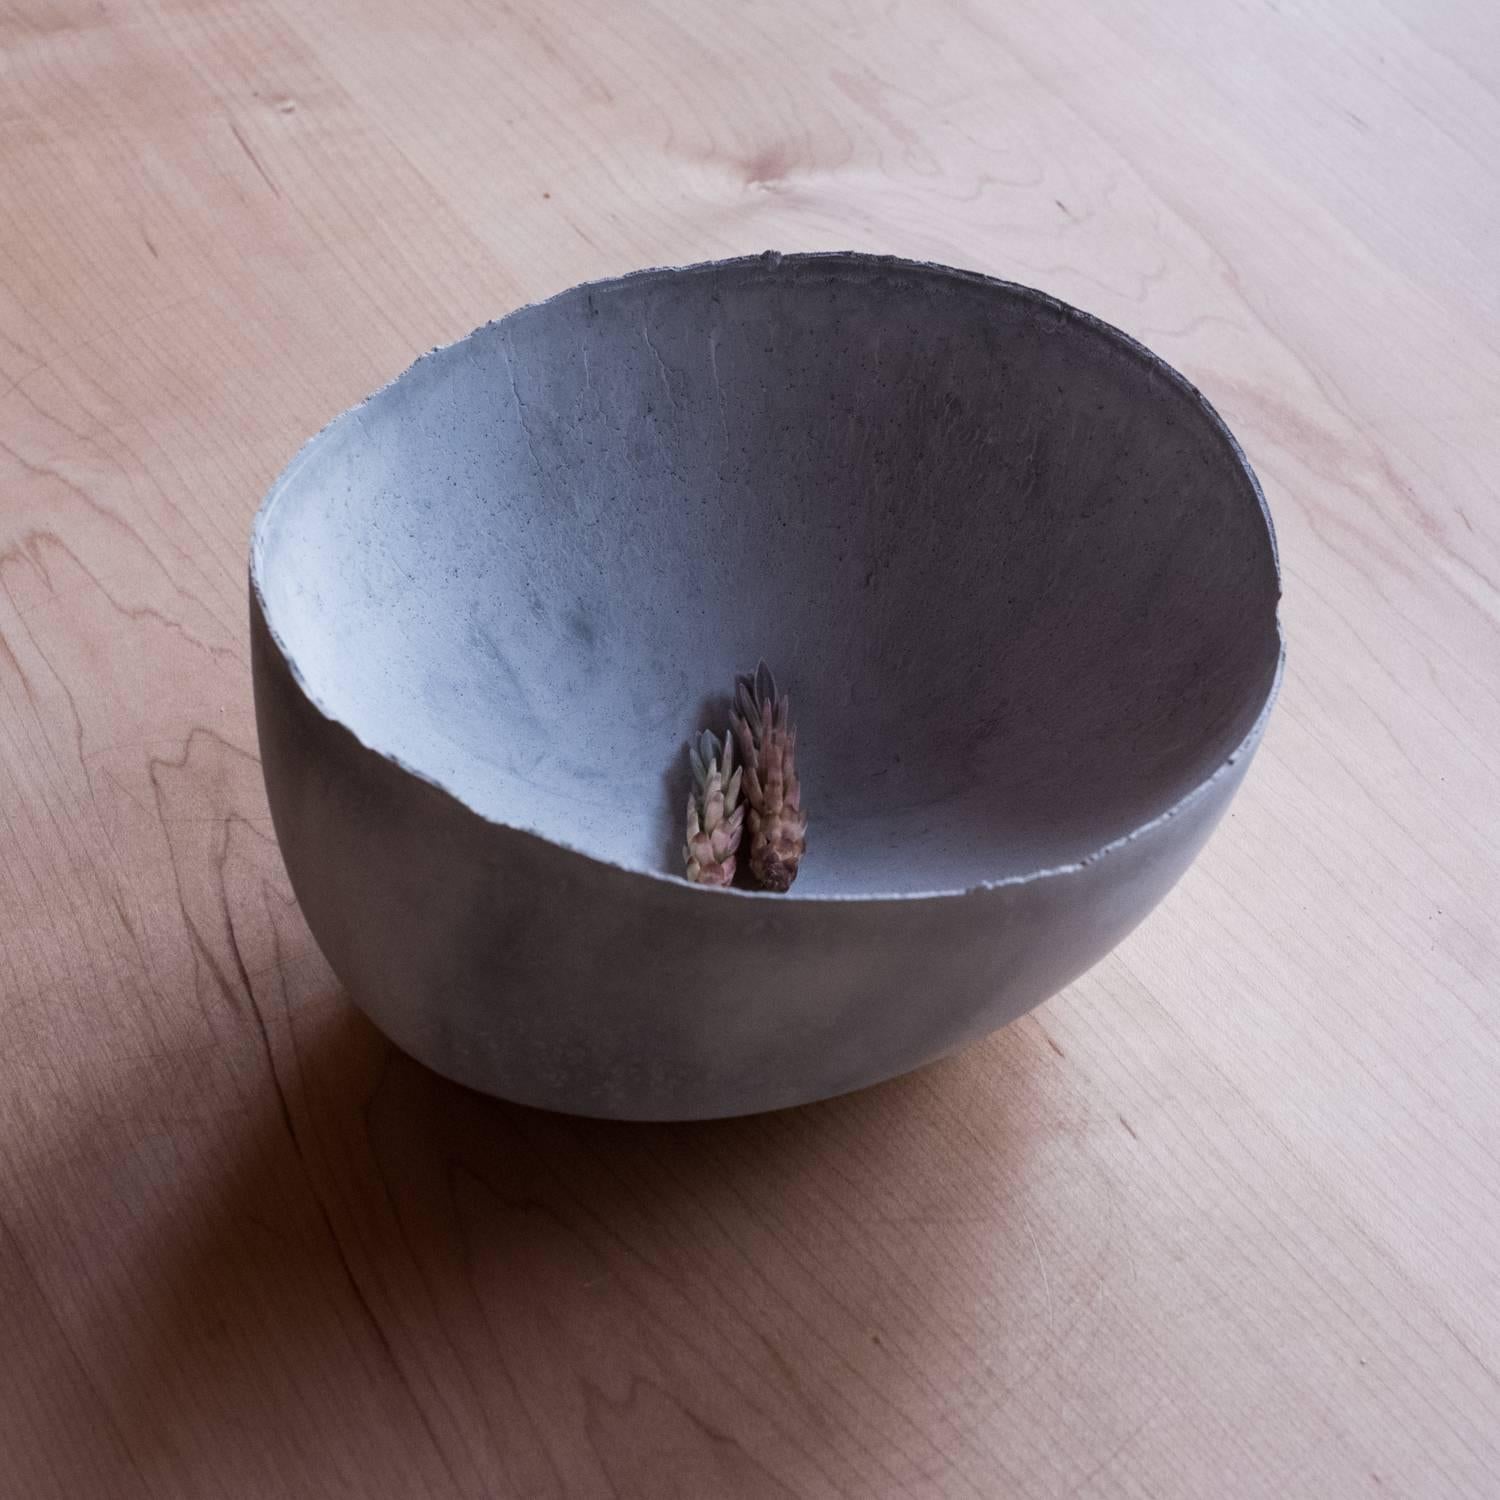 Handmade Cast Concrete Bowl in Grey by UMÉ Studio In New Condition For Sale In Oakland, CA